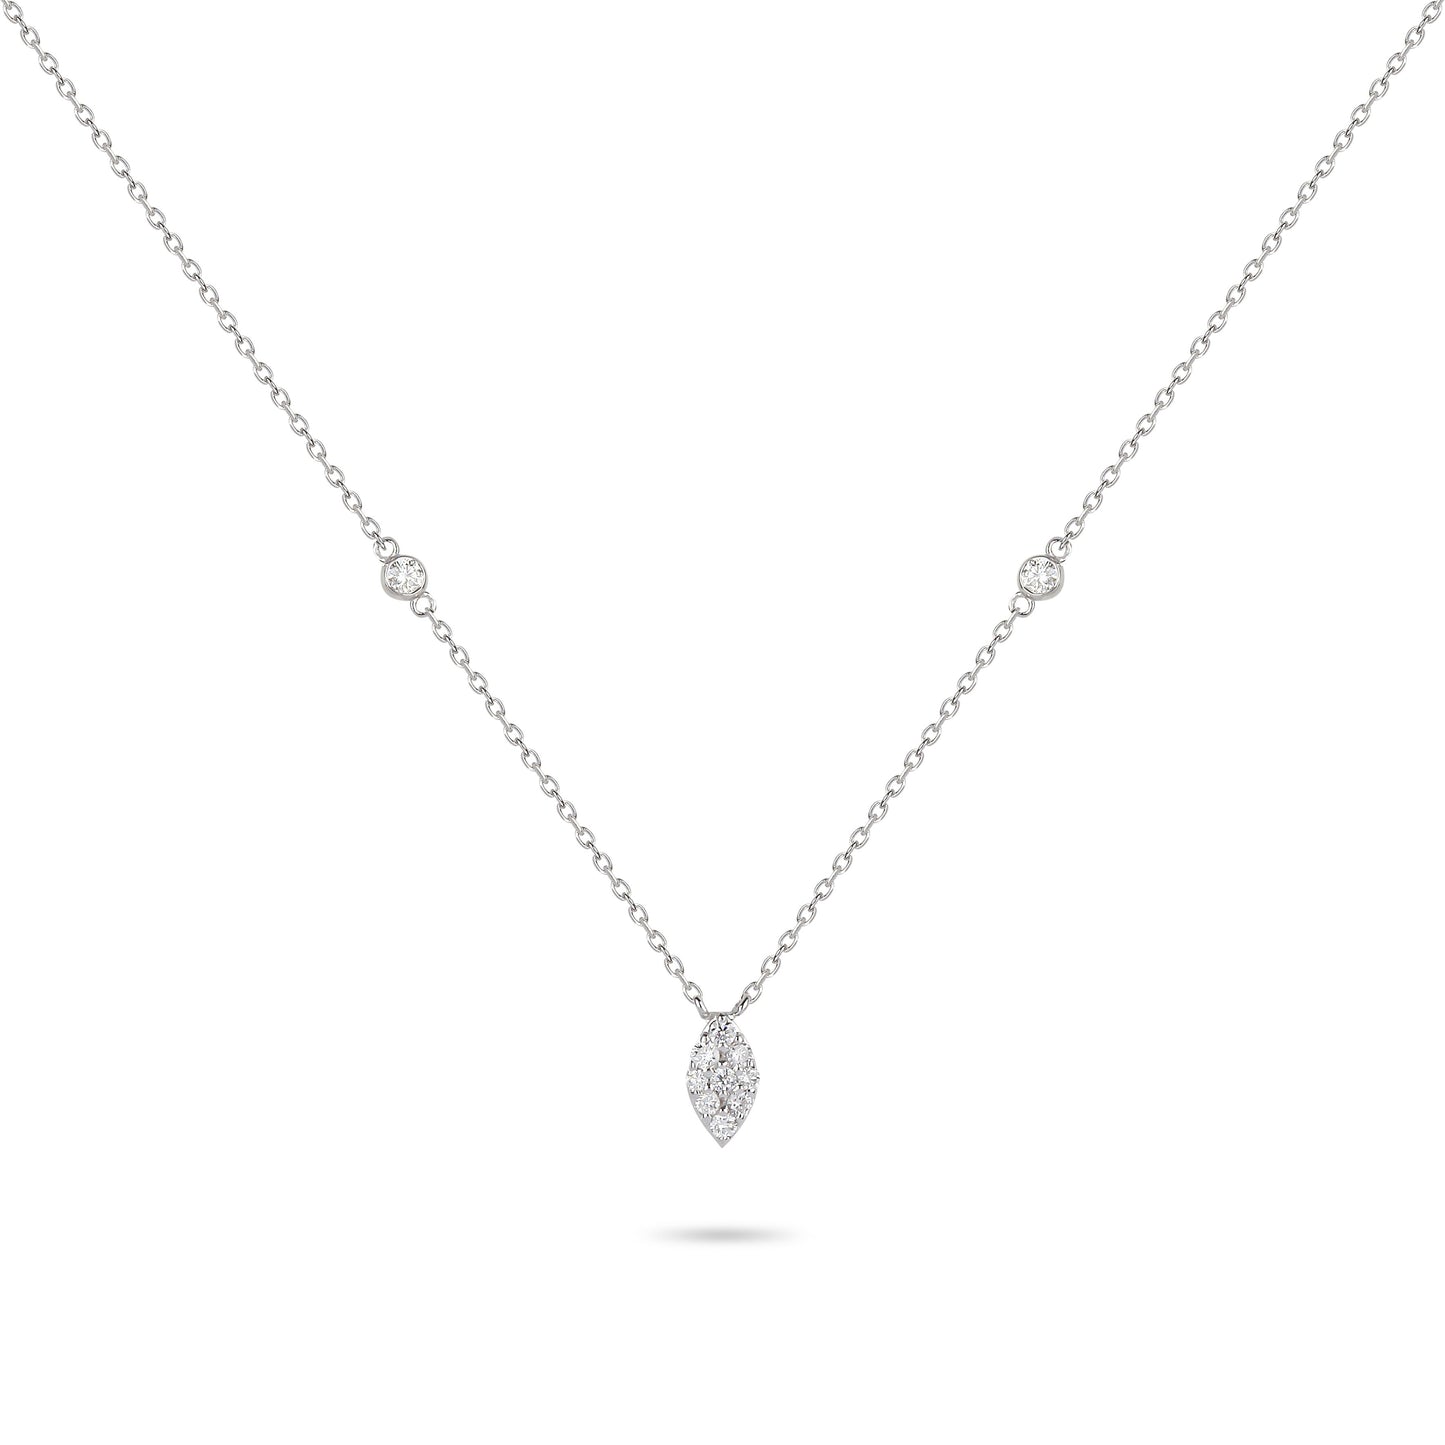 Marquise Shaped Illusion Diamond Necklace | Diamond Necklace | Necklaces For Women